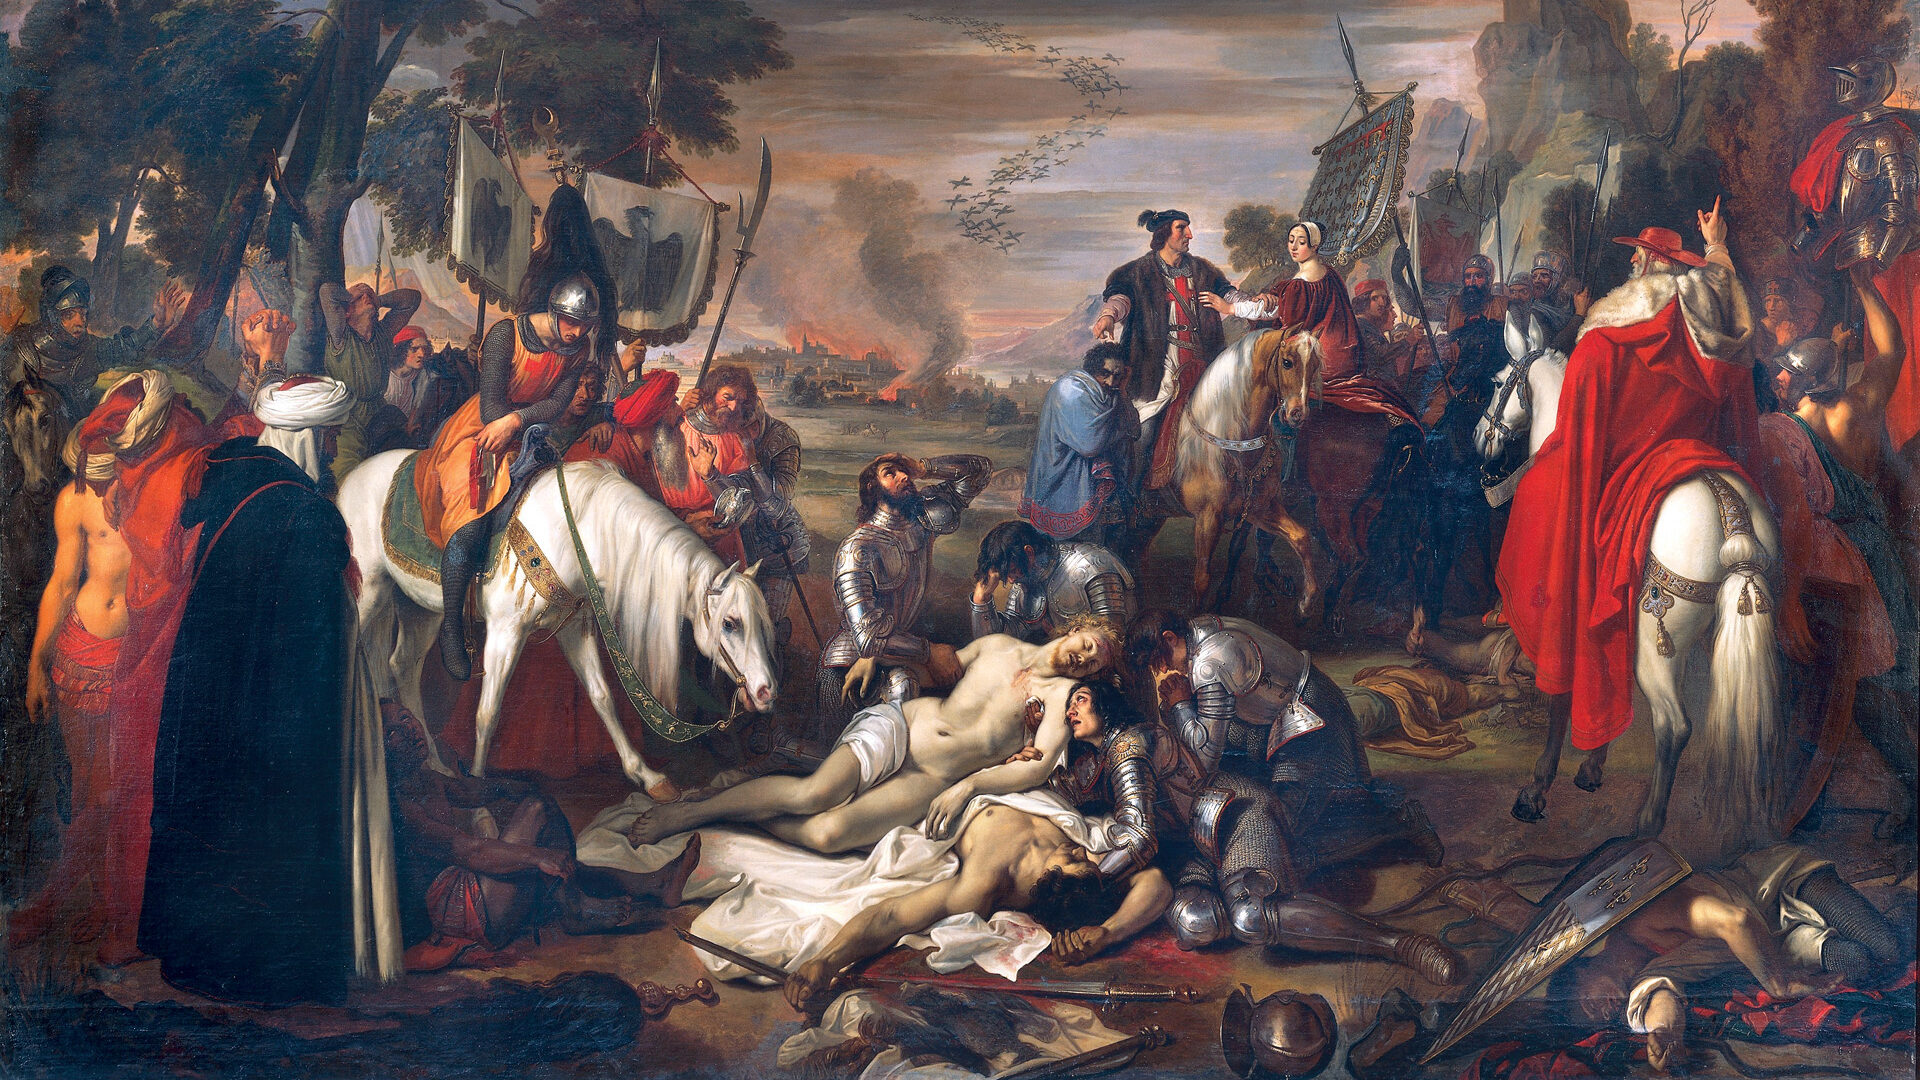 The stripped body of King Manfred of Sicily, who fell during the final phase of the Battle of Benevento, was not discovered until three days after the fight. Knights weep in the foreground as the city, which was sacked by the French, burns in the background of Giuseppe Bezzuoli’s Neoclassic painting.